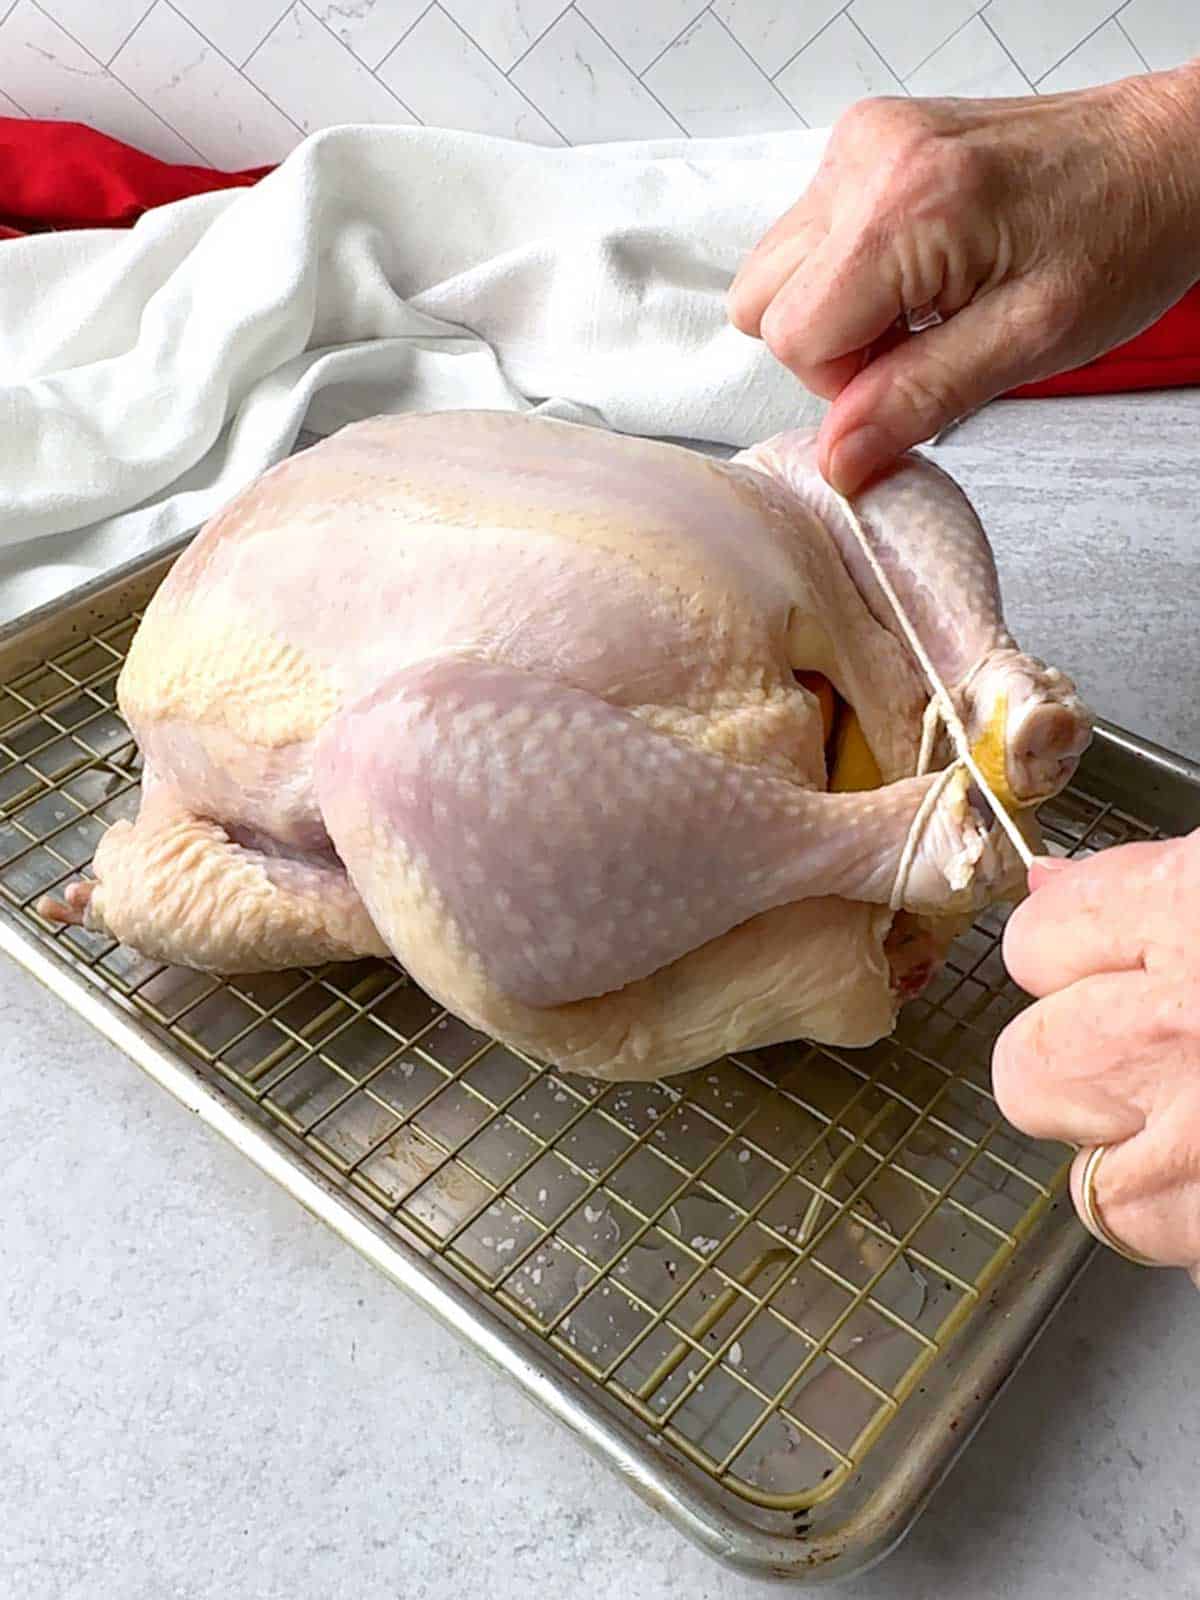 Tying the chicken legs together with kitchen twine.